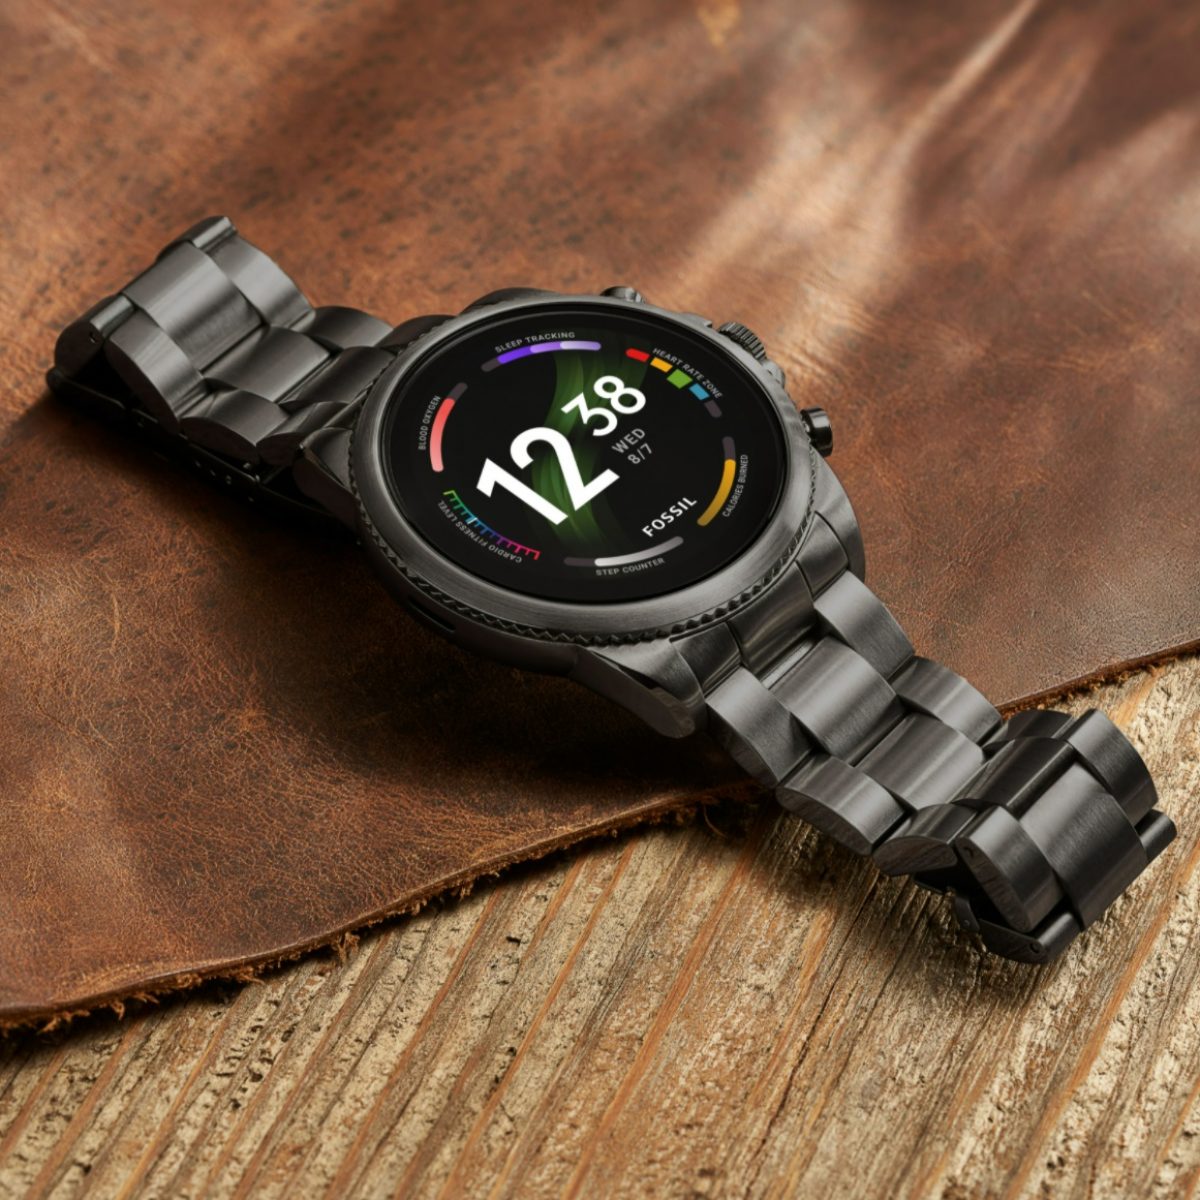 Fossil Gen 6 Official at $299 With Everything Except Wear OS 3